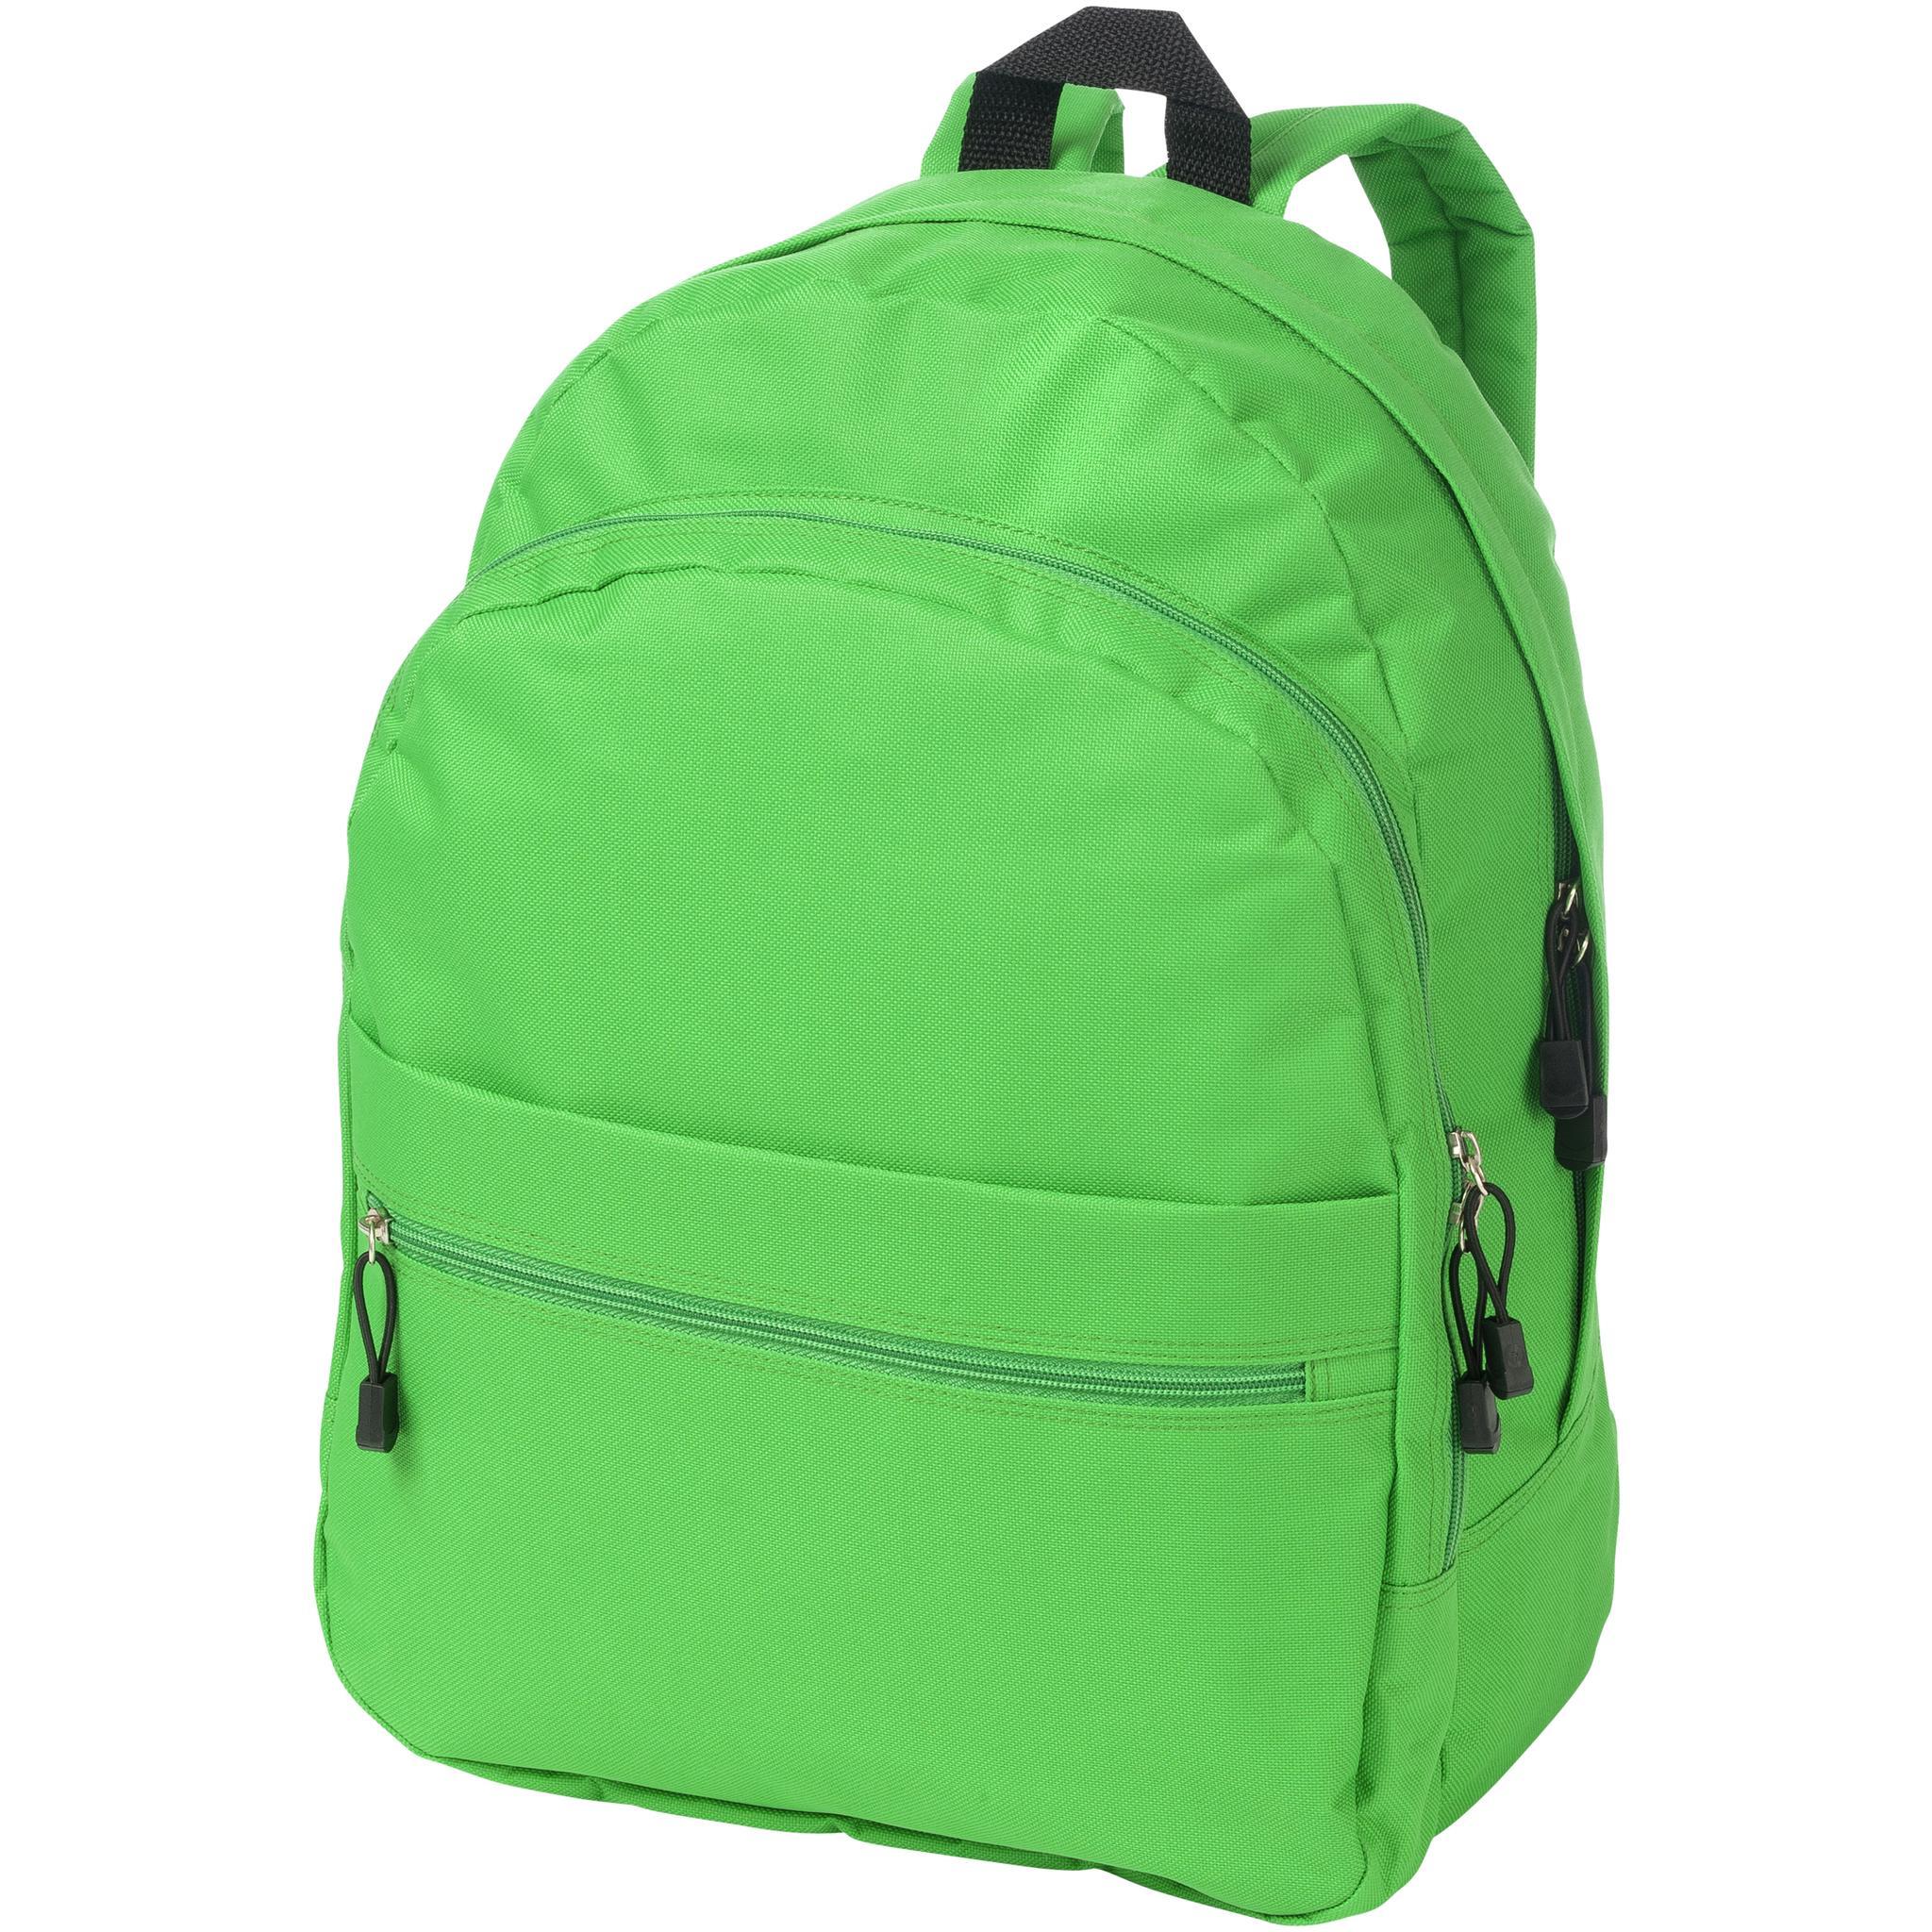 Bullet Trend Backpack (Bright Green) (35 x 17 x 45 cm)